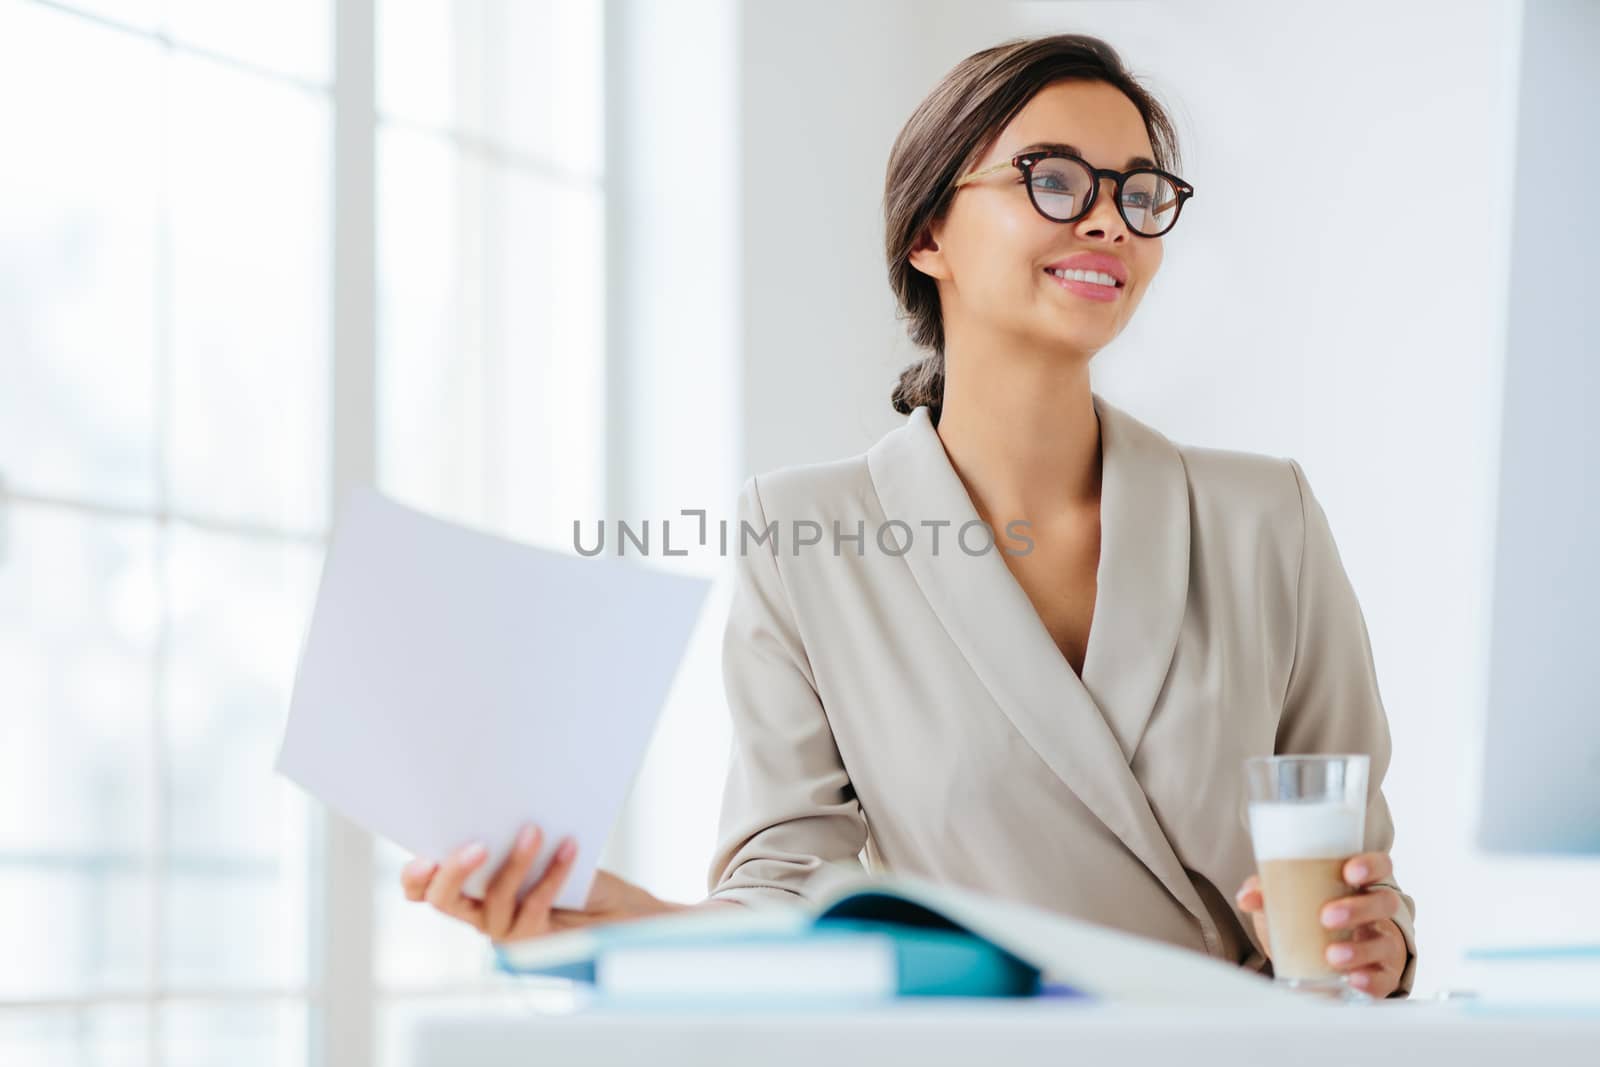 Cheerful businesswoman reads paper documents, focused aside with smile drinks milkshake sits at desktop makes business plan for project. Female executive manager in spectacles poses in coworking space